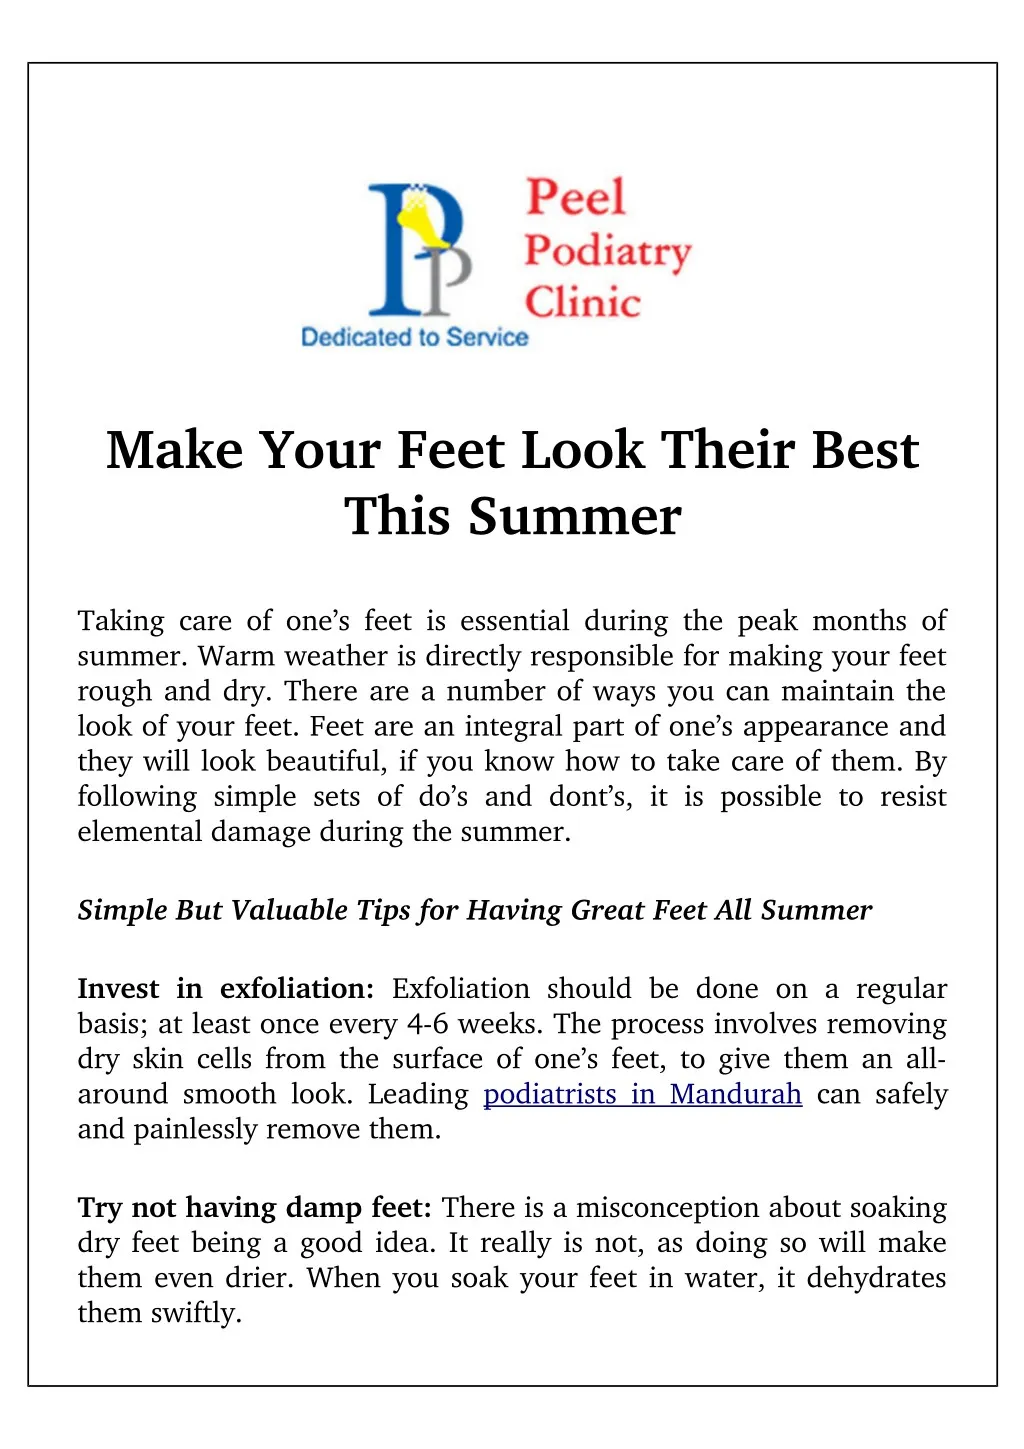 make your feet look their best this summer